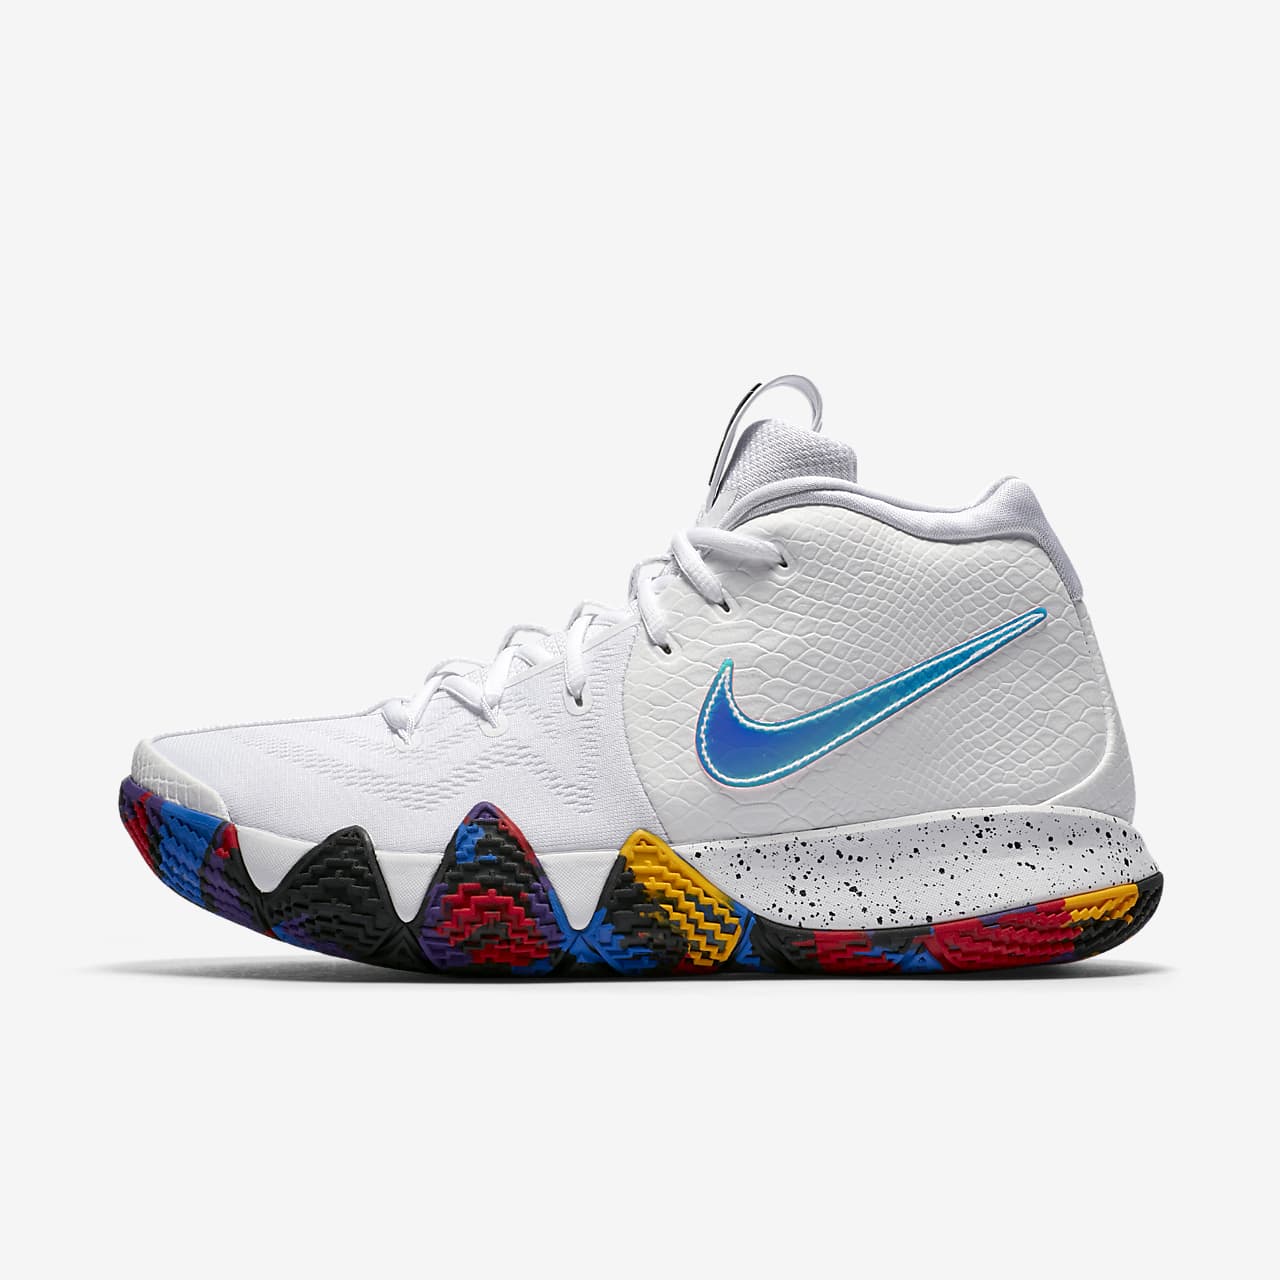 kyrie 4 images